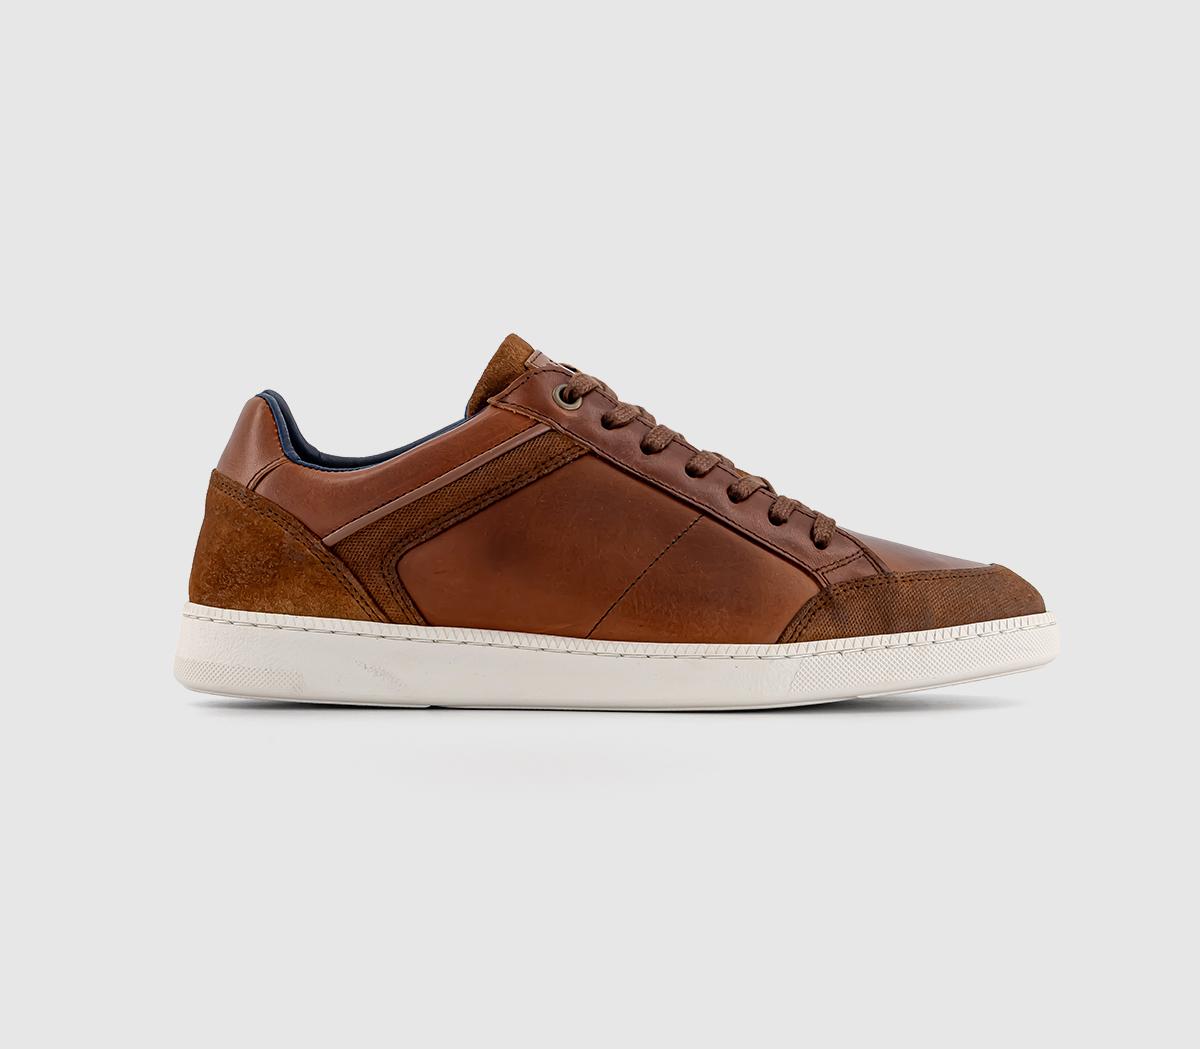 OFFICE Cottesloe Lace Up Trainers Tan Leather - Men's Casual Shoes